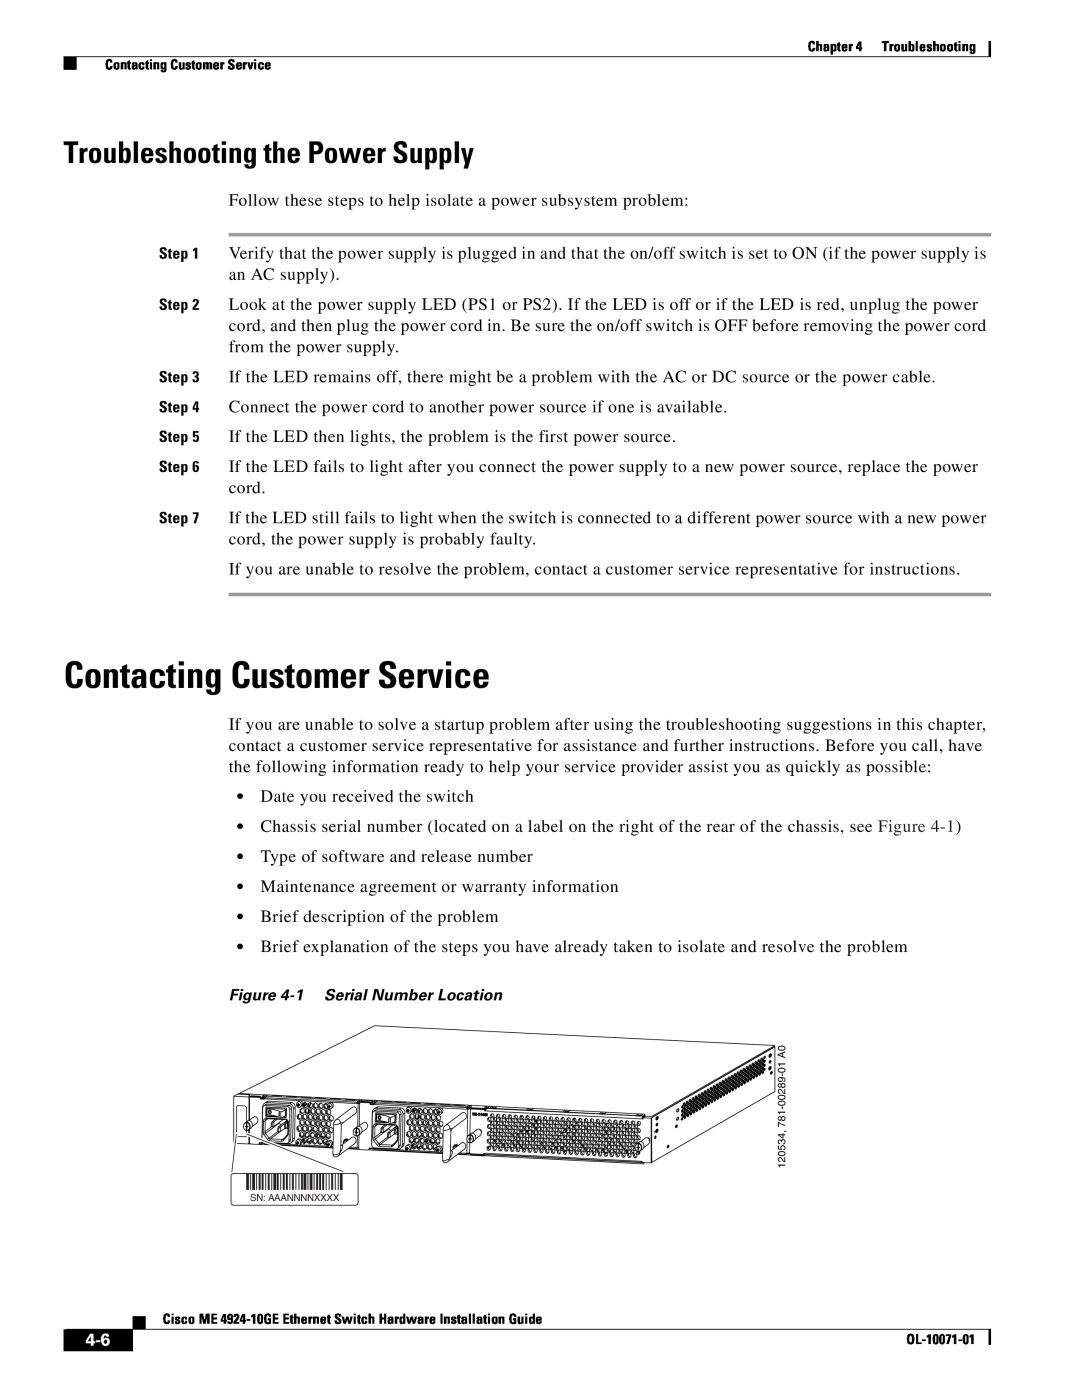 Cisco Systems ME 4924-10GE manual Contacting Customer Service, Troubleshooting the Power Supply 